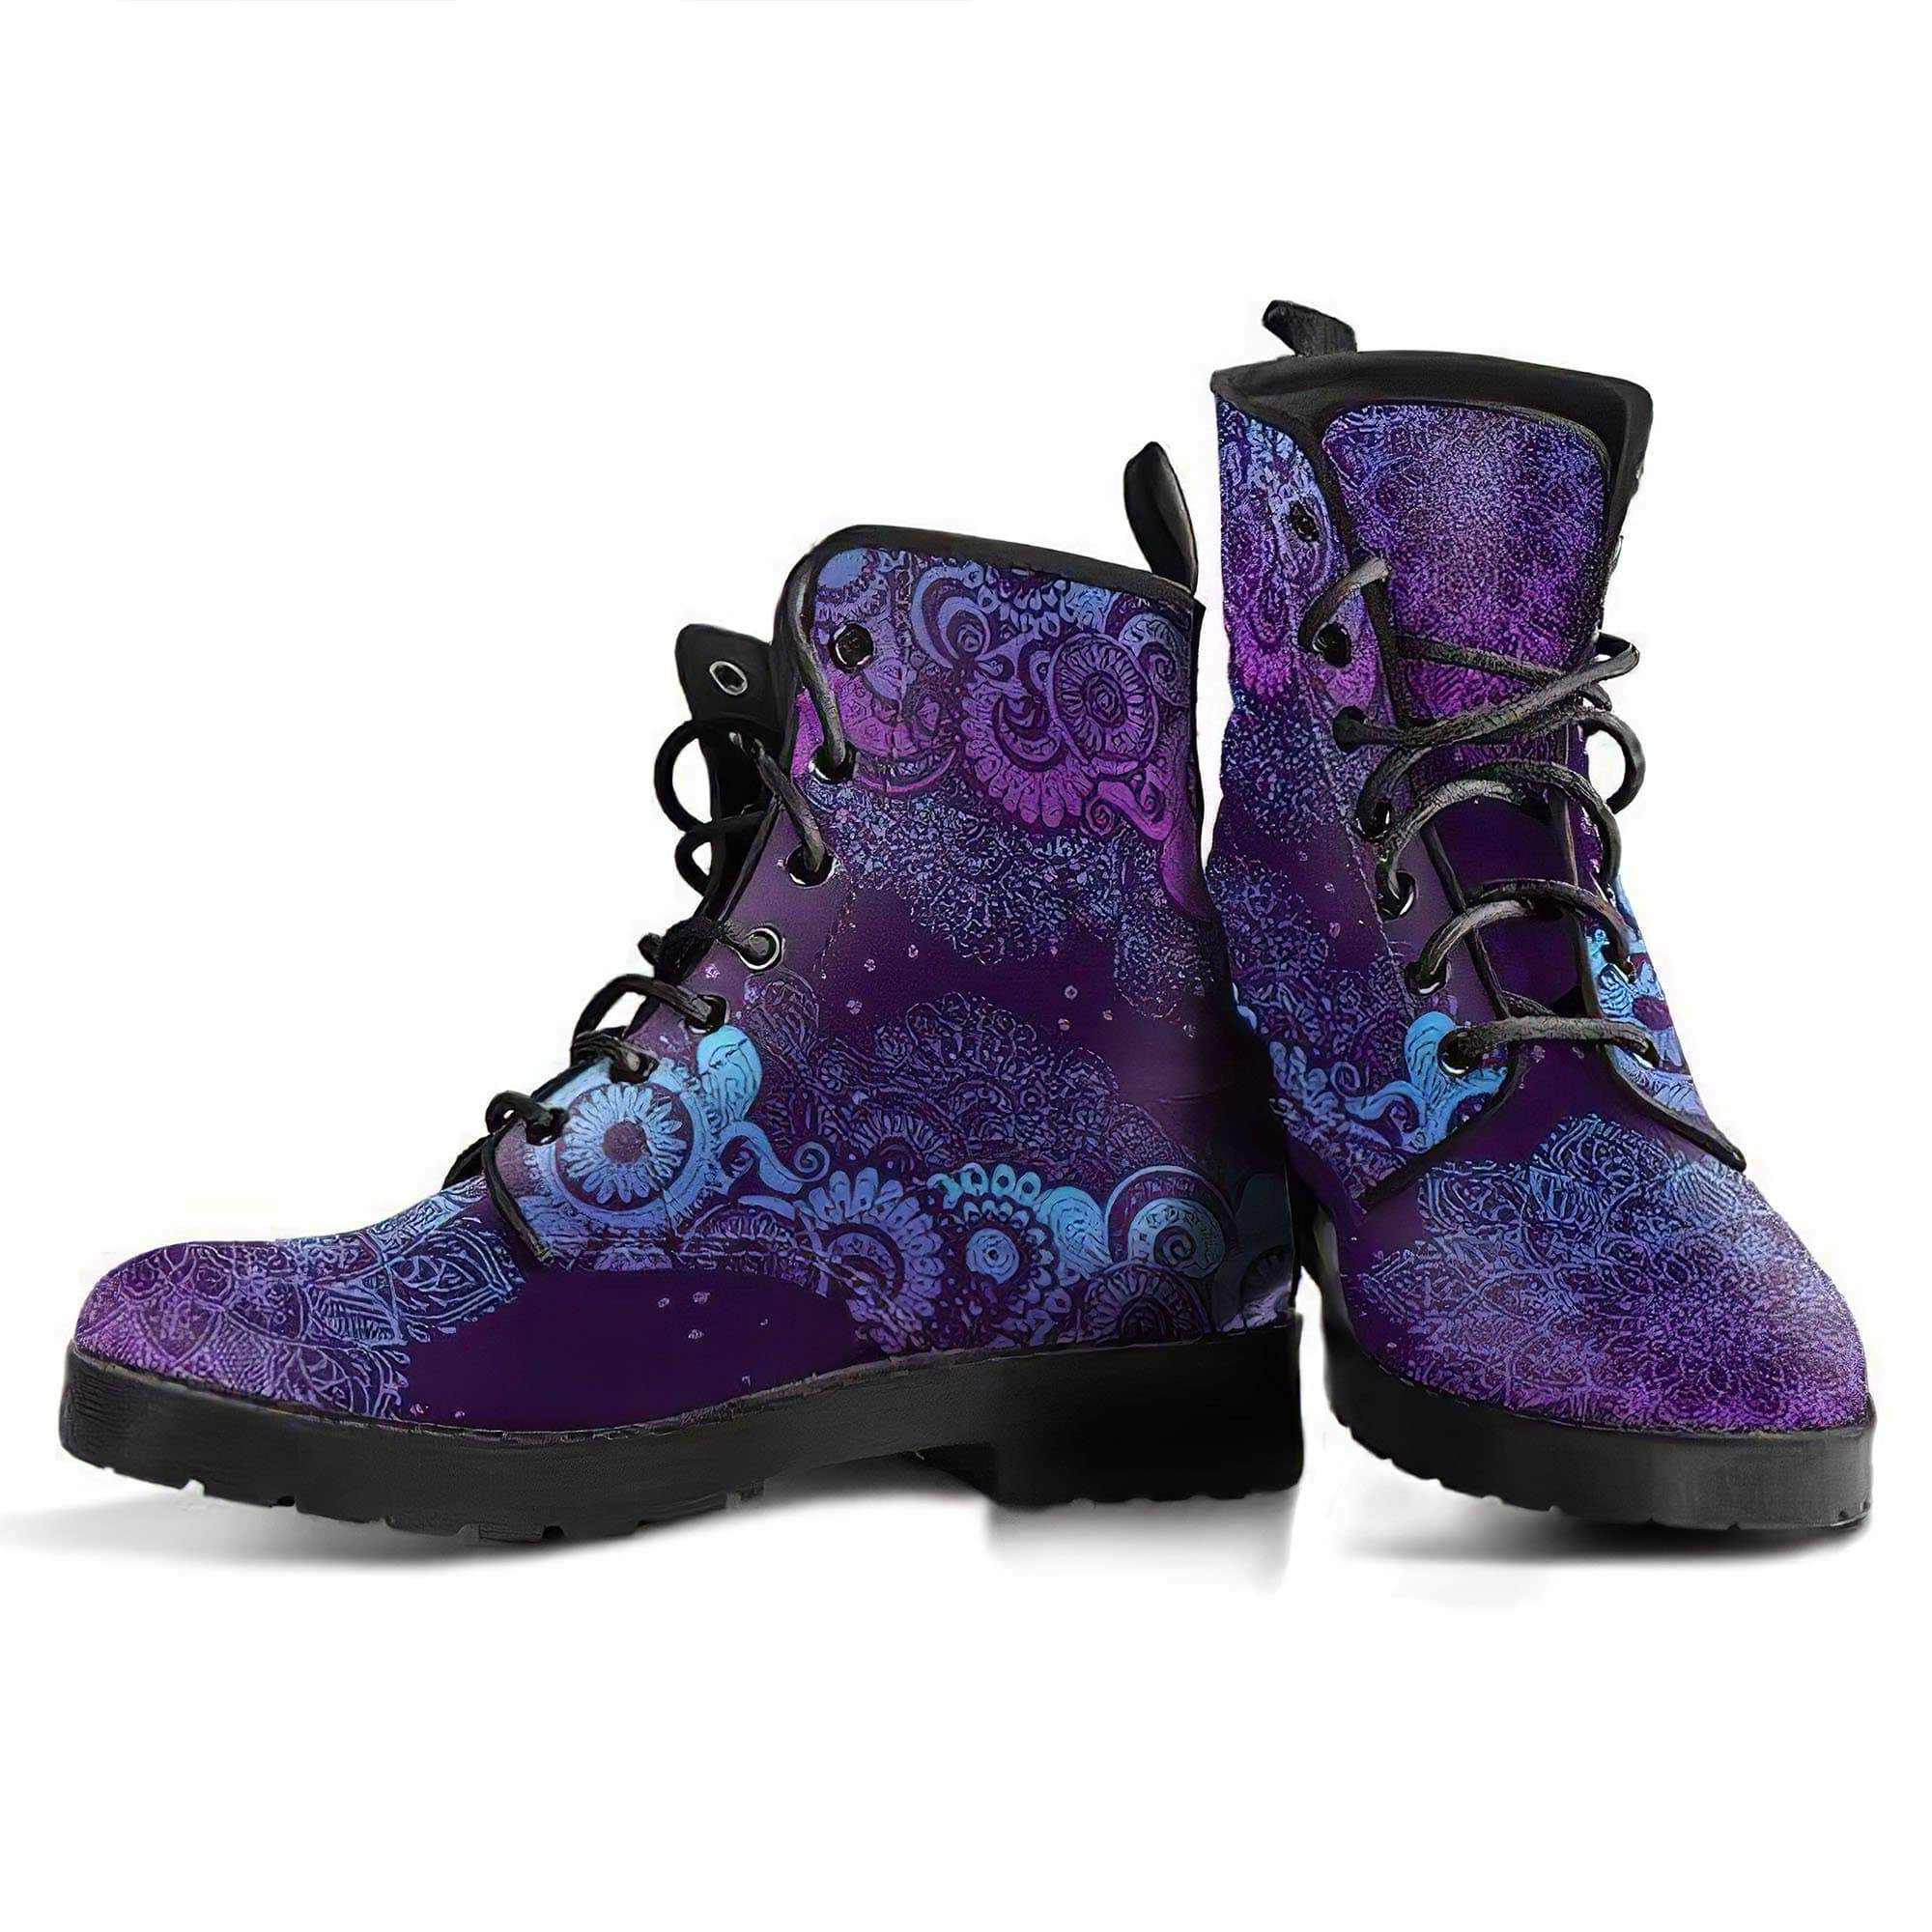 purple-paisley-mandala-handcrafted-boots-women-s-leather-boots-12051937919037.jpg